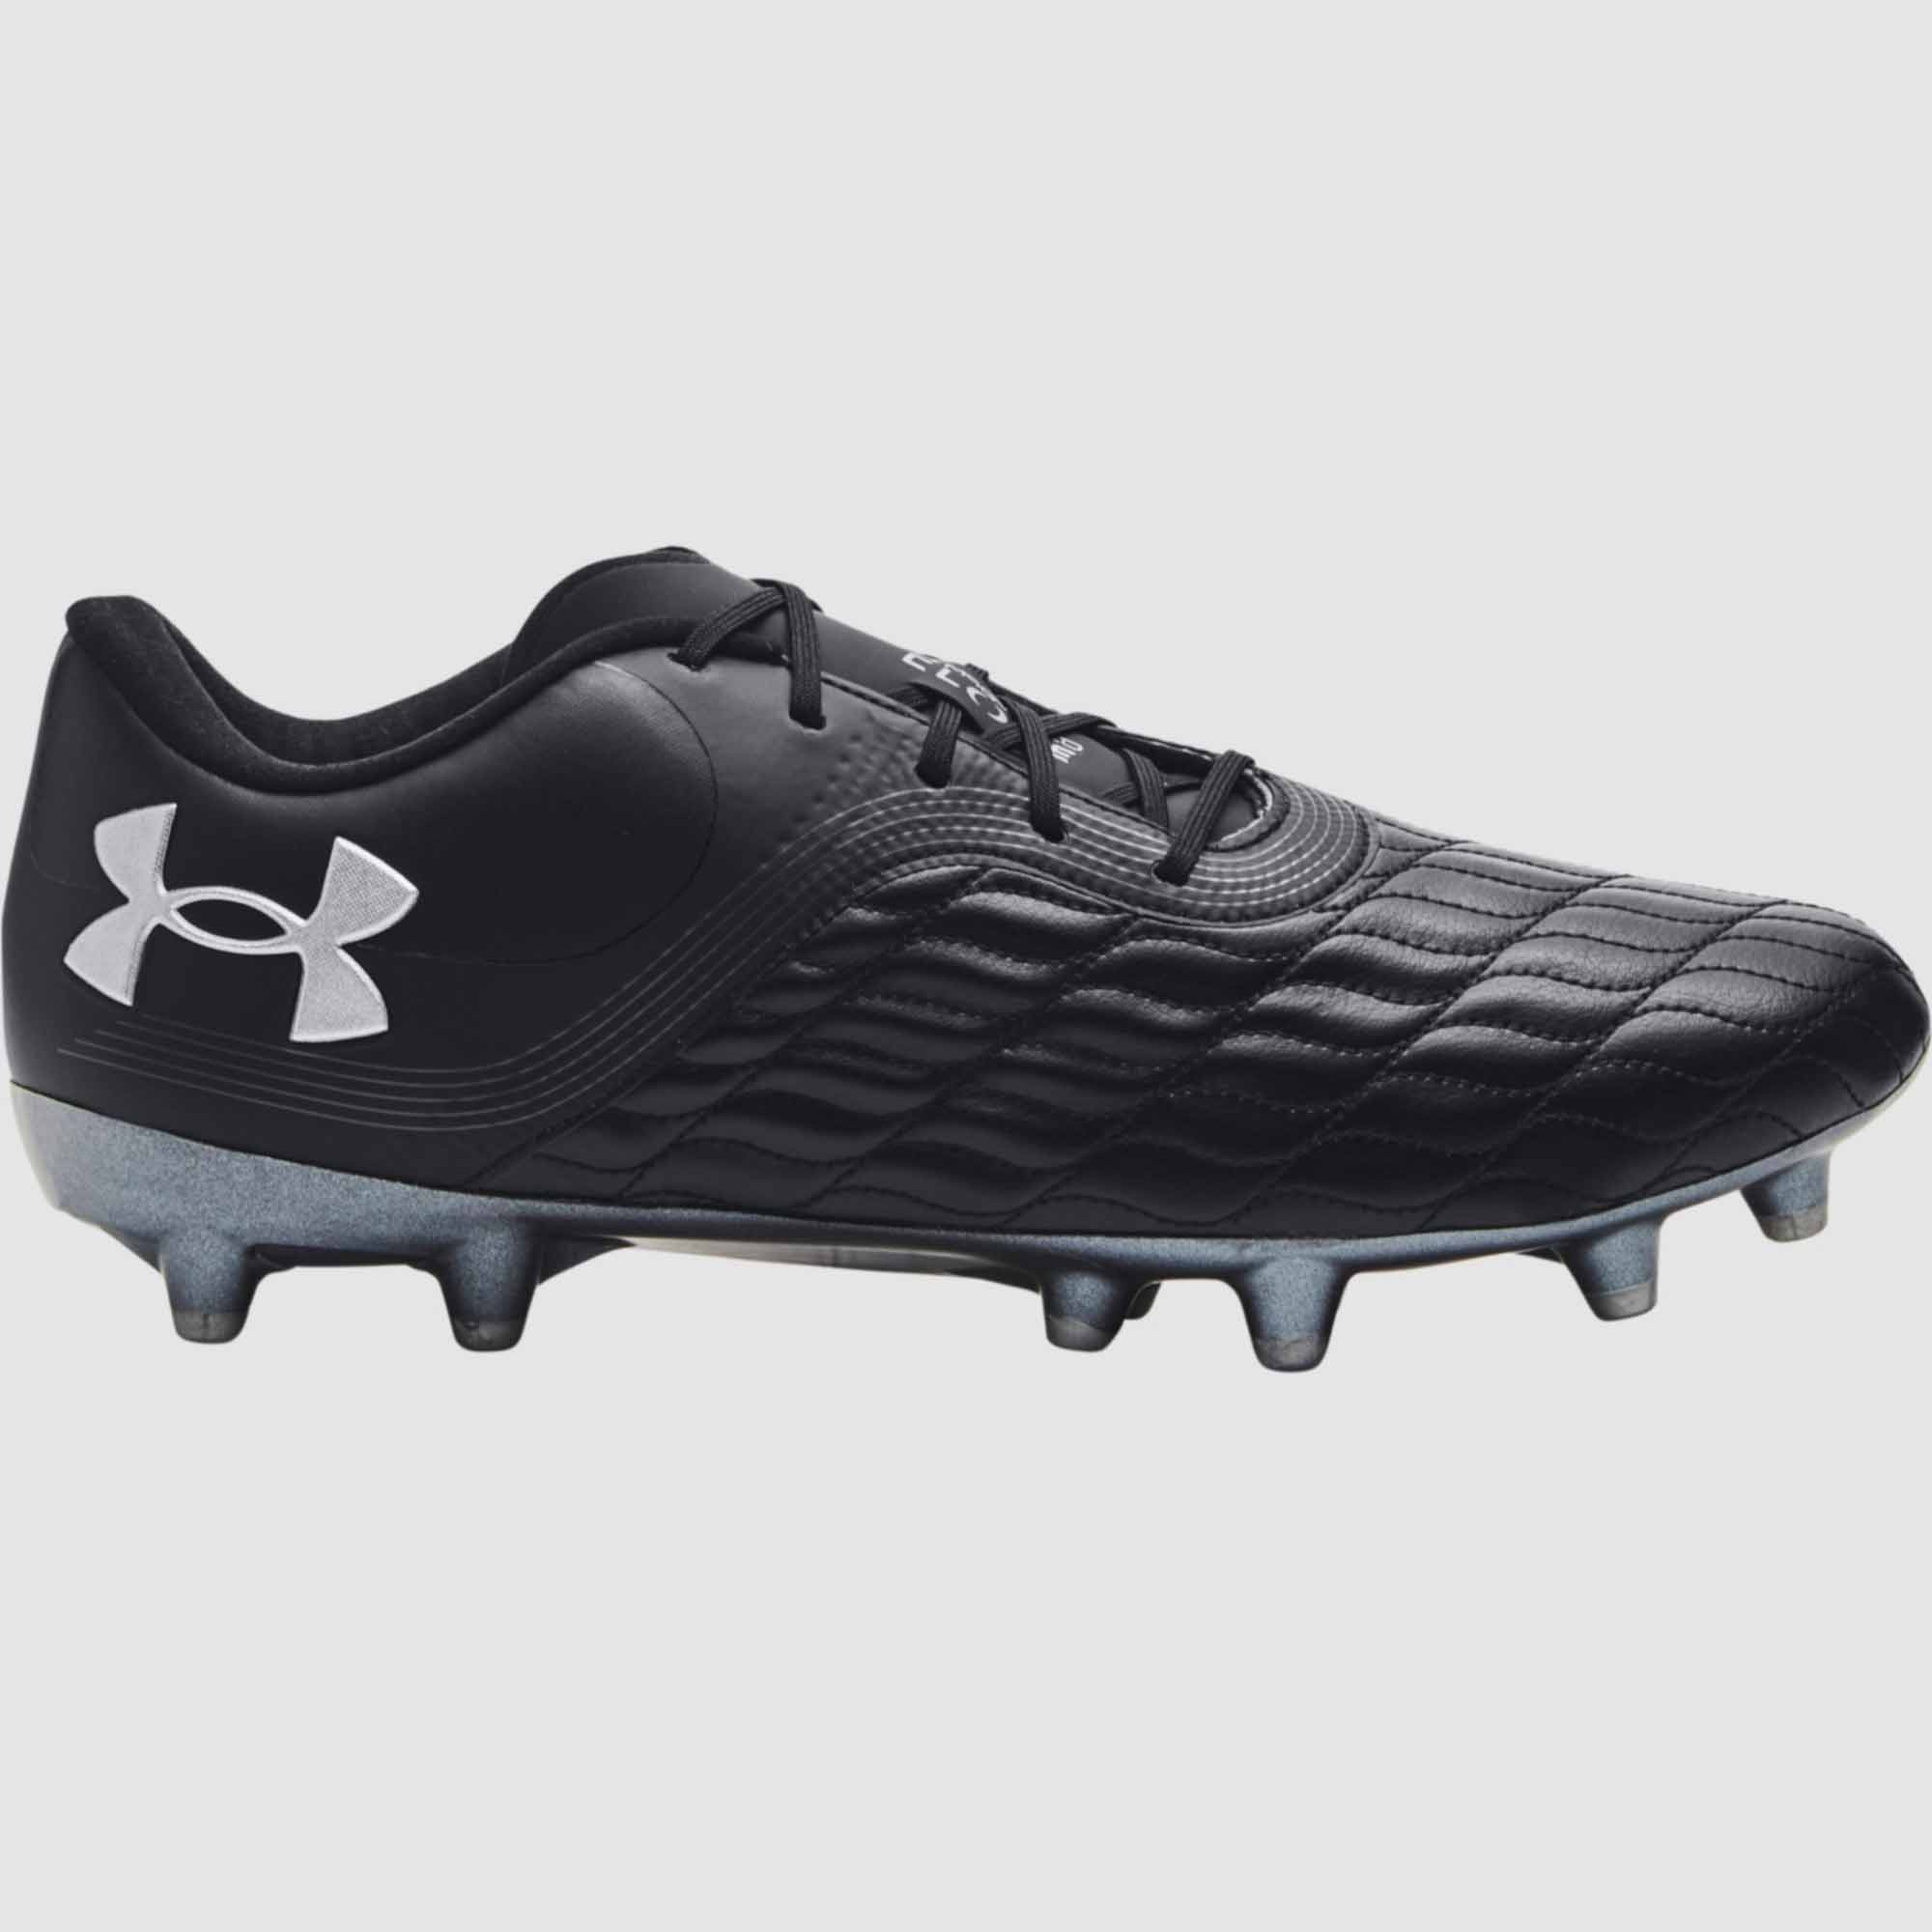 Under Armour Unisex Clone Magnetico Pro 3 FG Football Boots